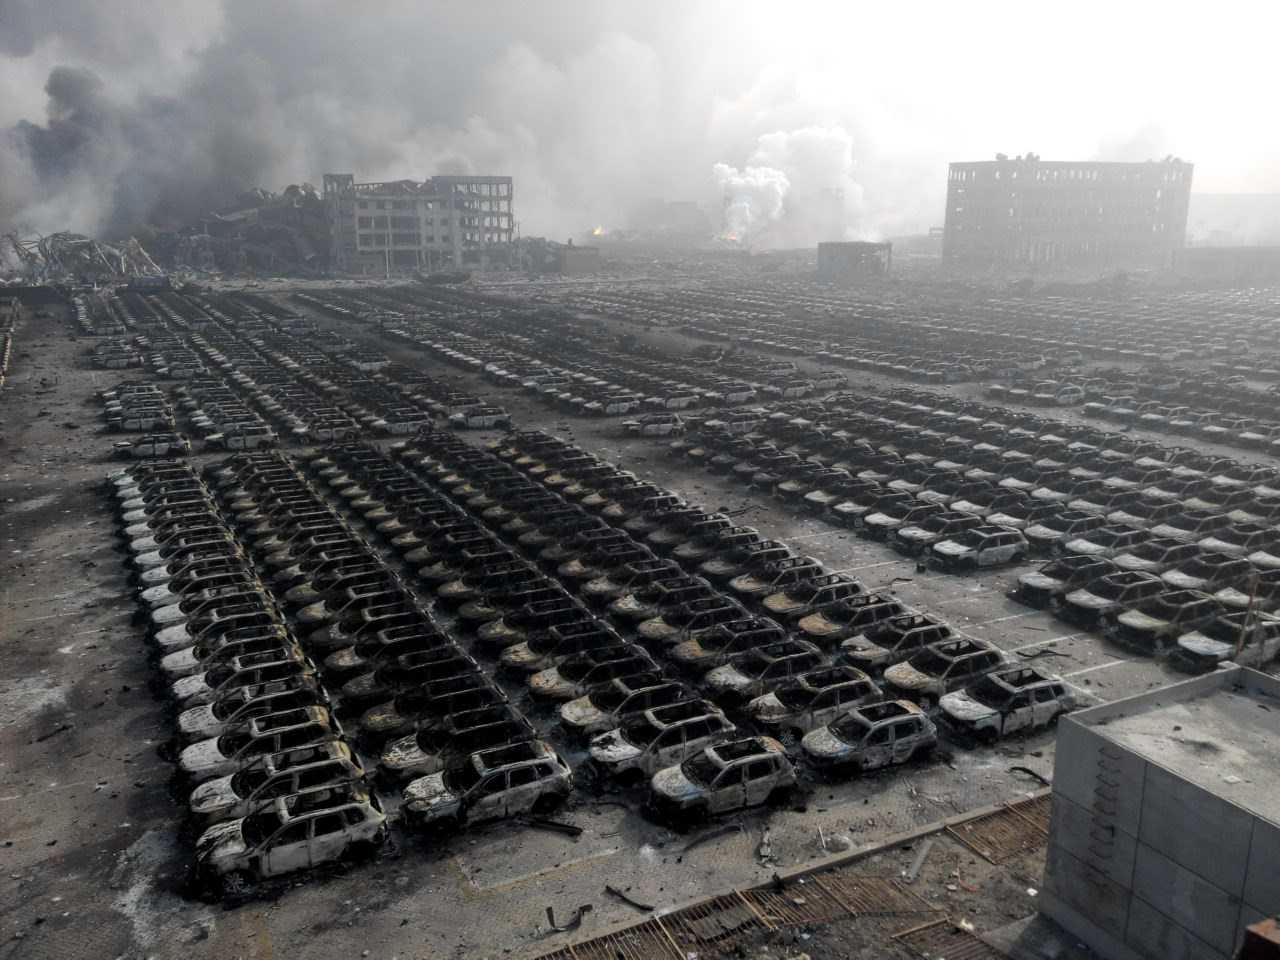 47 Photos of the Aftermath of the Tianjin Explosion